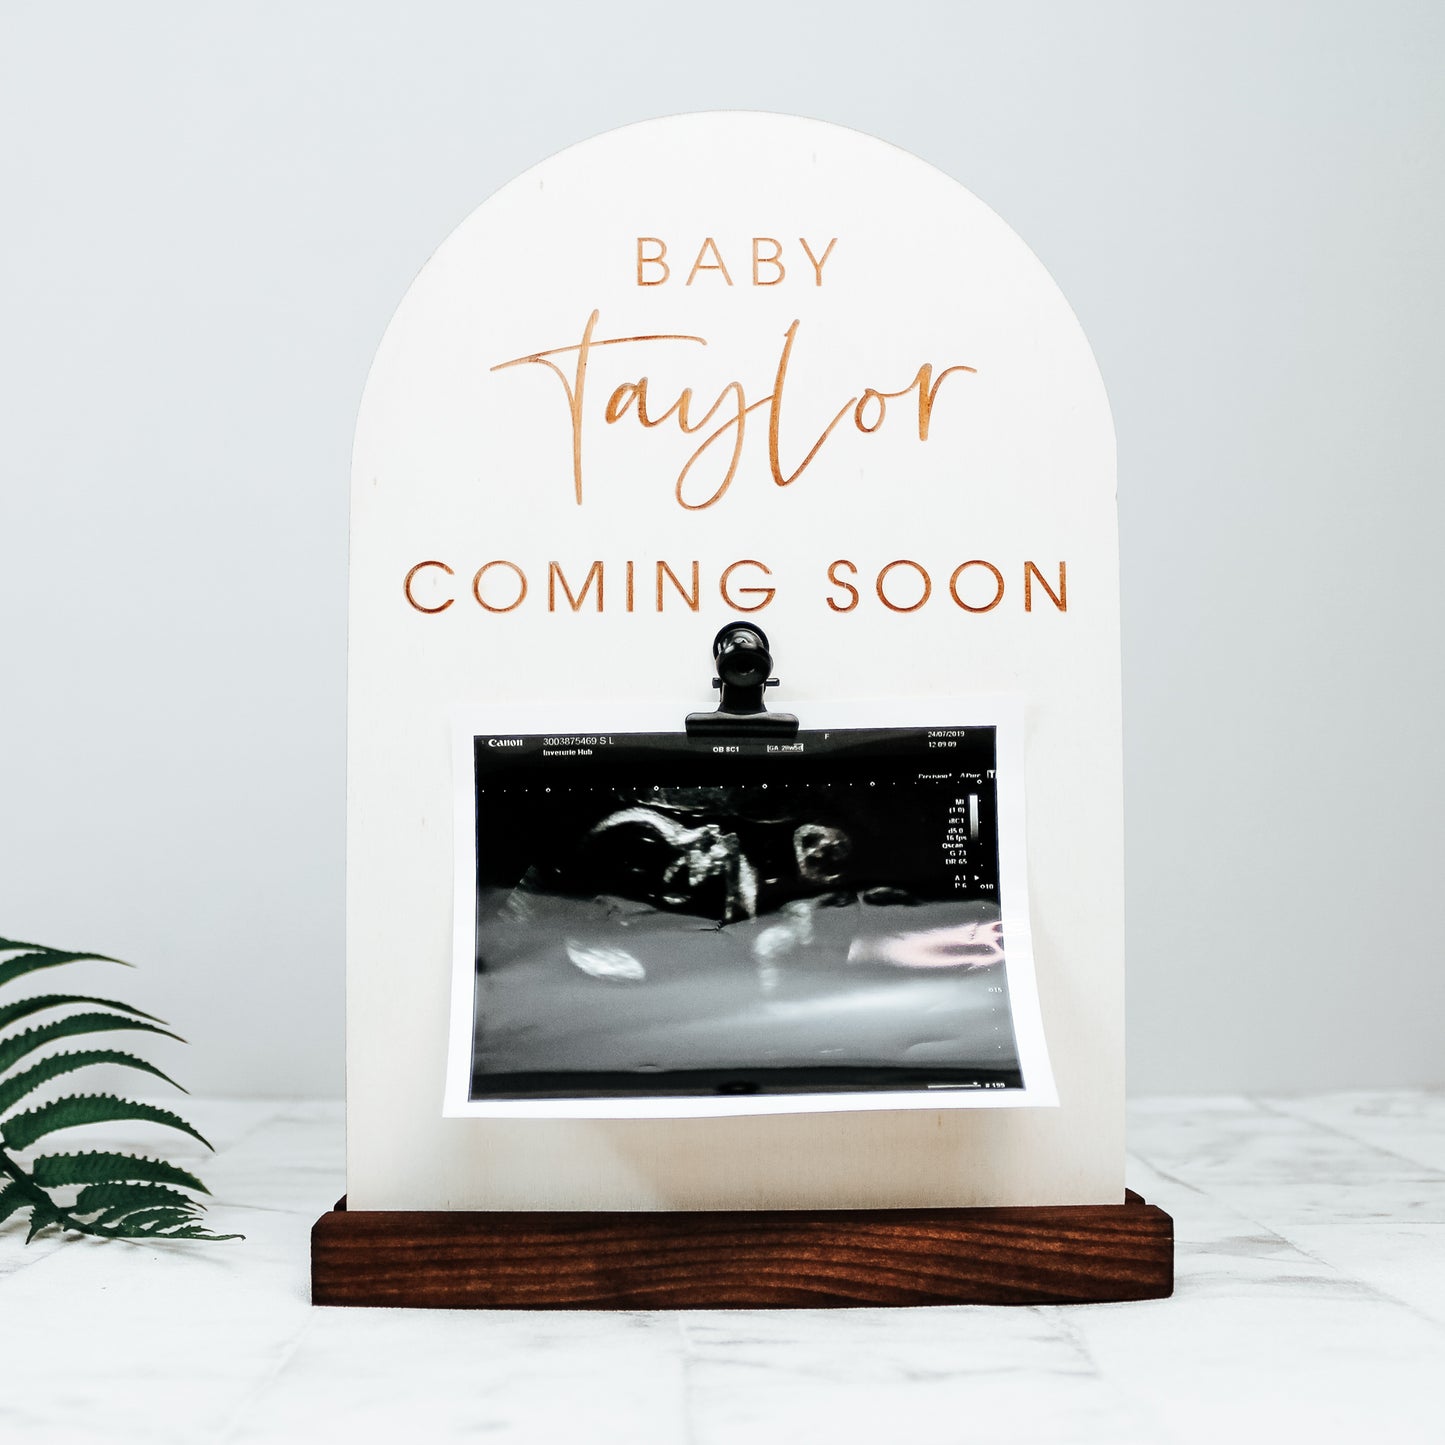 engraved and personalised wooden baby scan keepsake - perfect for showing your new addition on social media